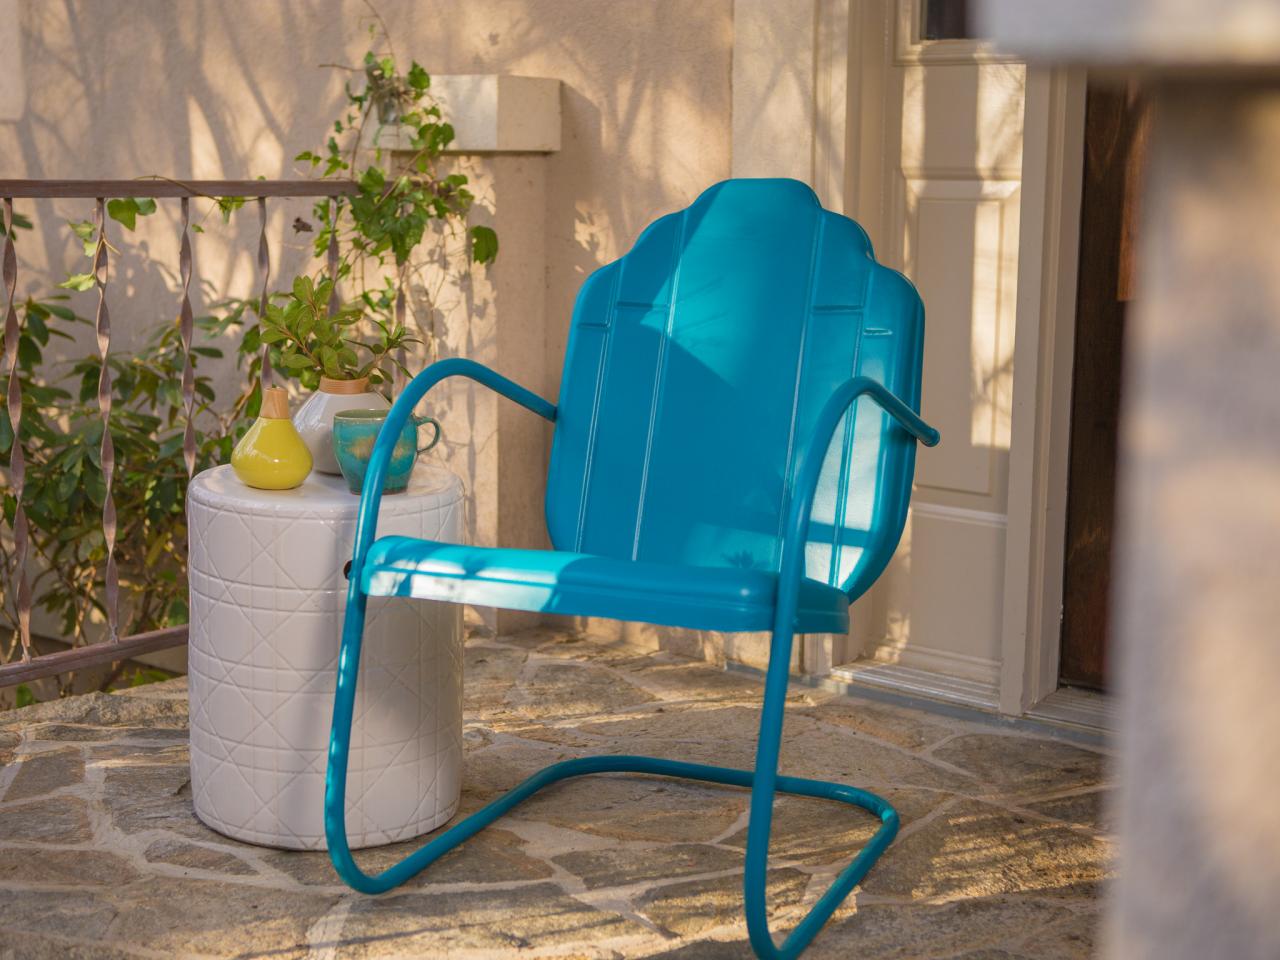 How To Paint An Outdoor Metal Chair, Can You Paint Iron Outdoor Furniture